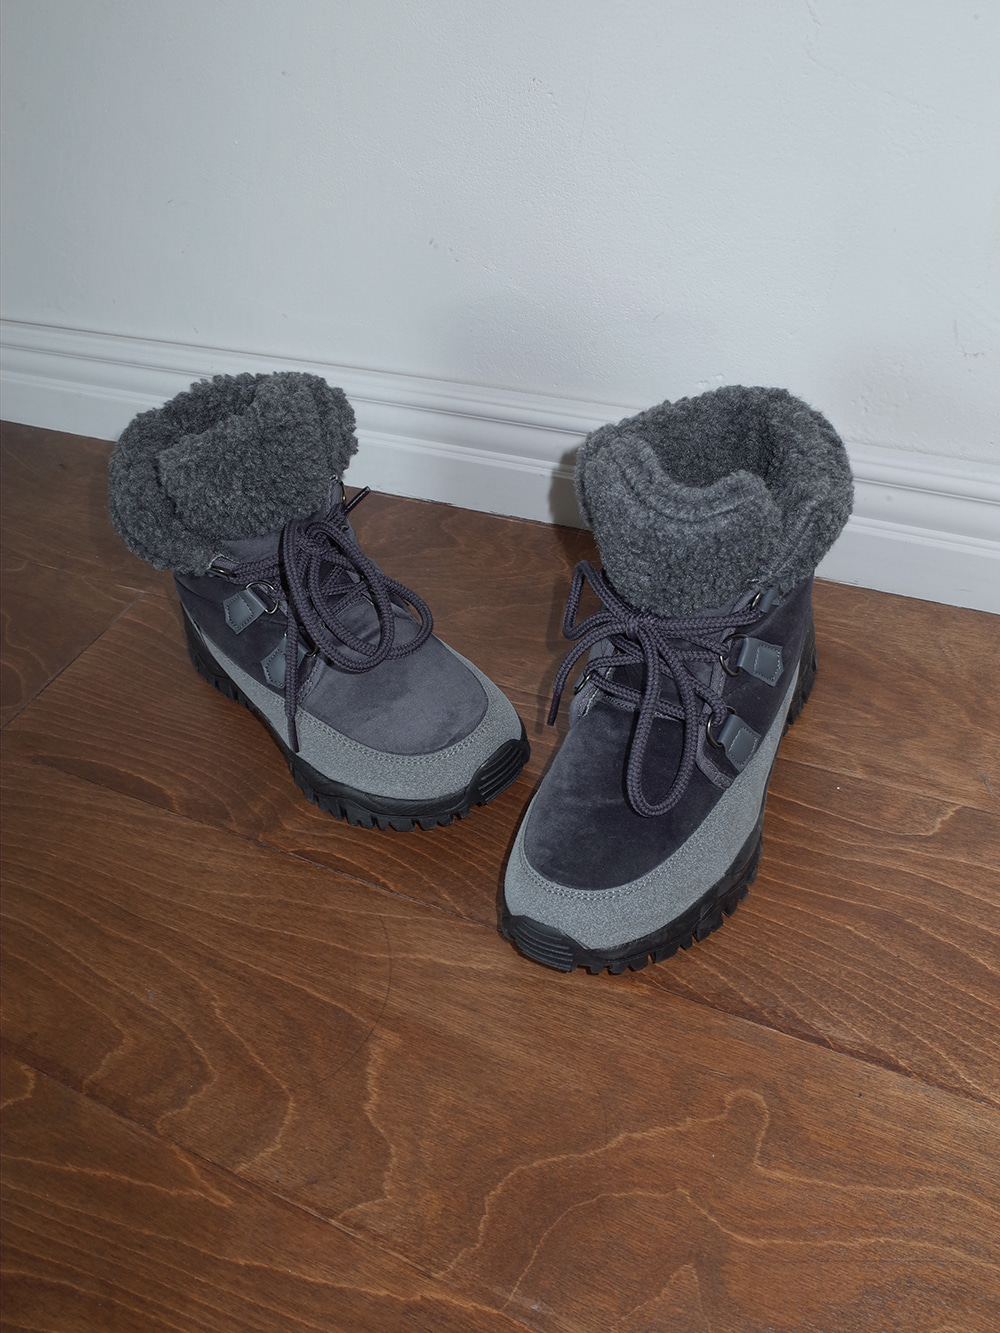 tracking winter boots